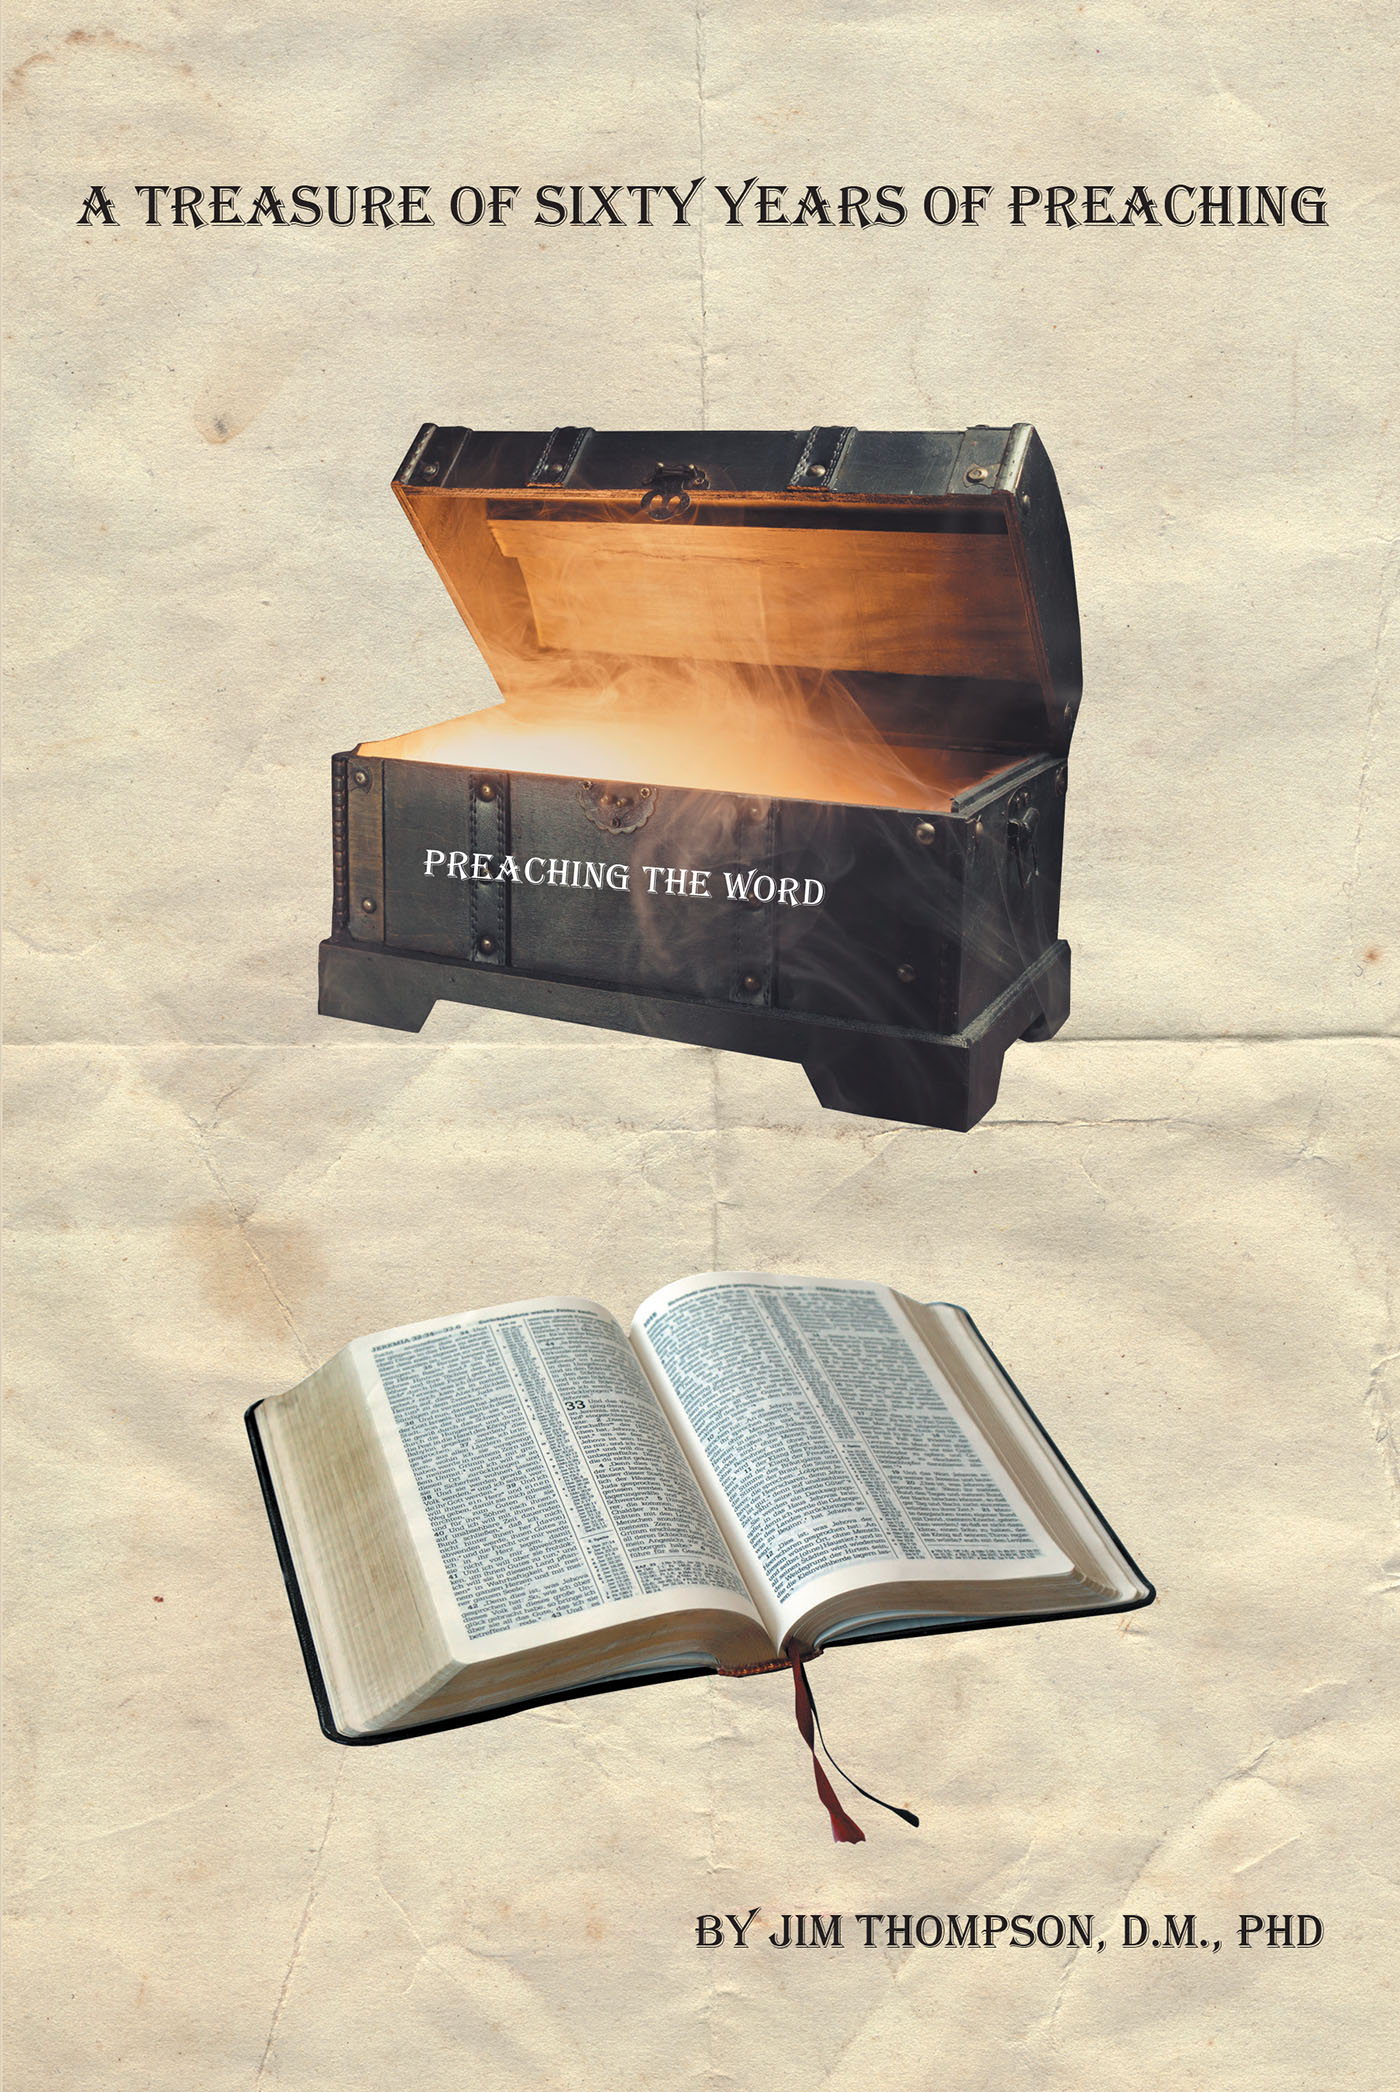 Author Jim Thompson, D.M., PhD’s New Book, "A Treasure of Sixty Years of Preaching," is a Collection of Messages to Help Readers Develop a Strong Connection to Christ